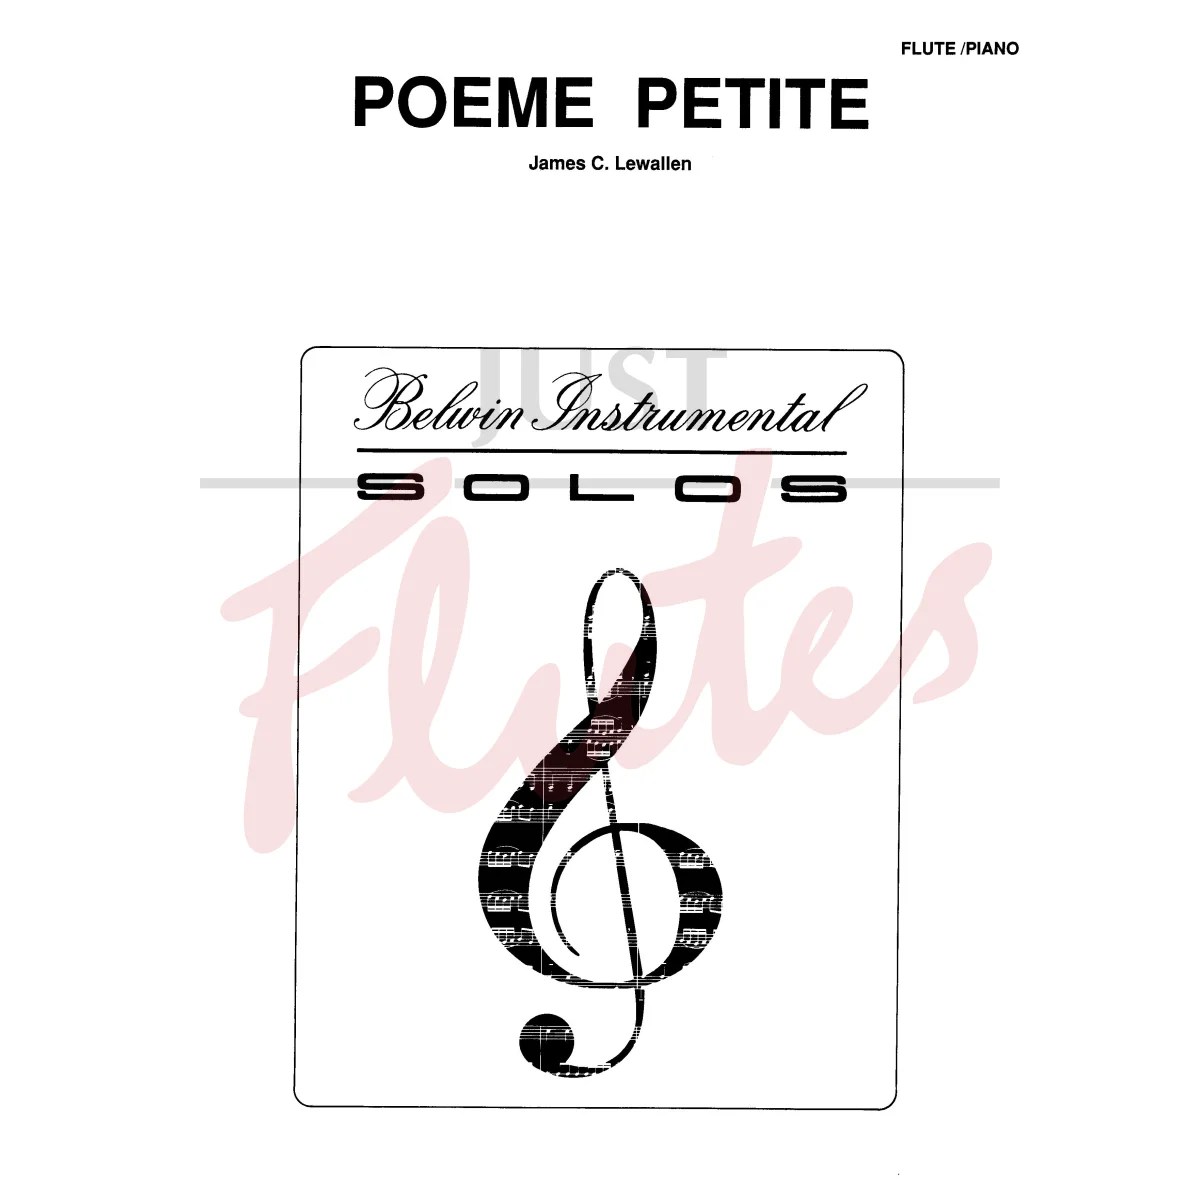 Poeme Petite for Flute and Piano